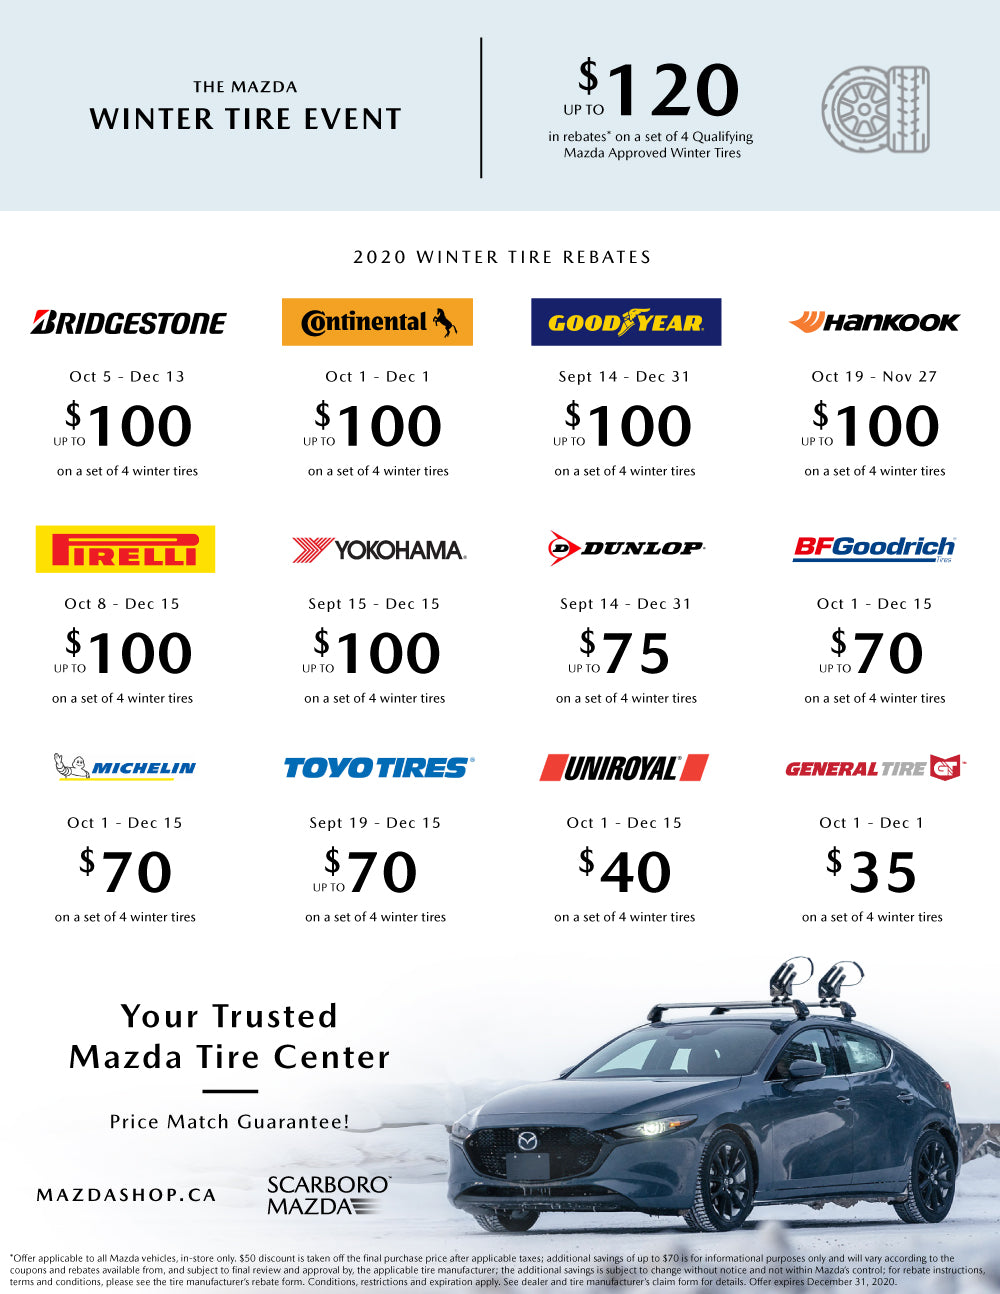 the-mazda-winter-tire-event-get-up-to-120-in-total-rebates-mazda